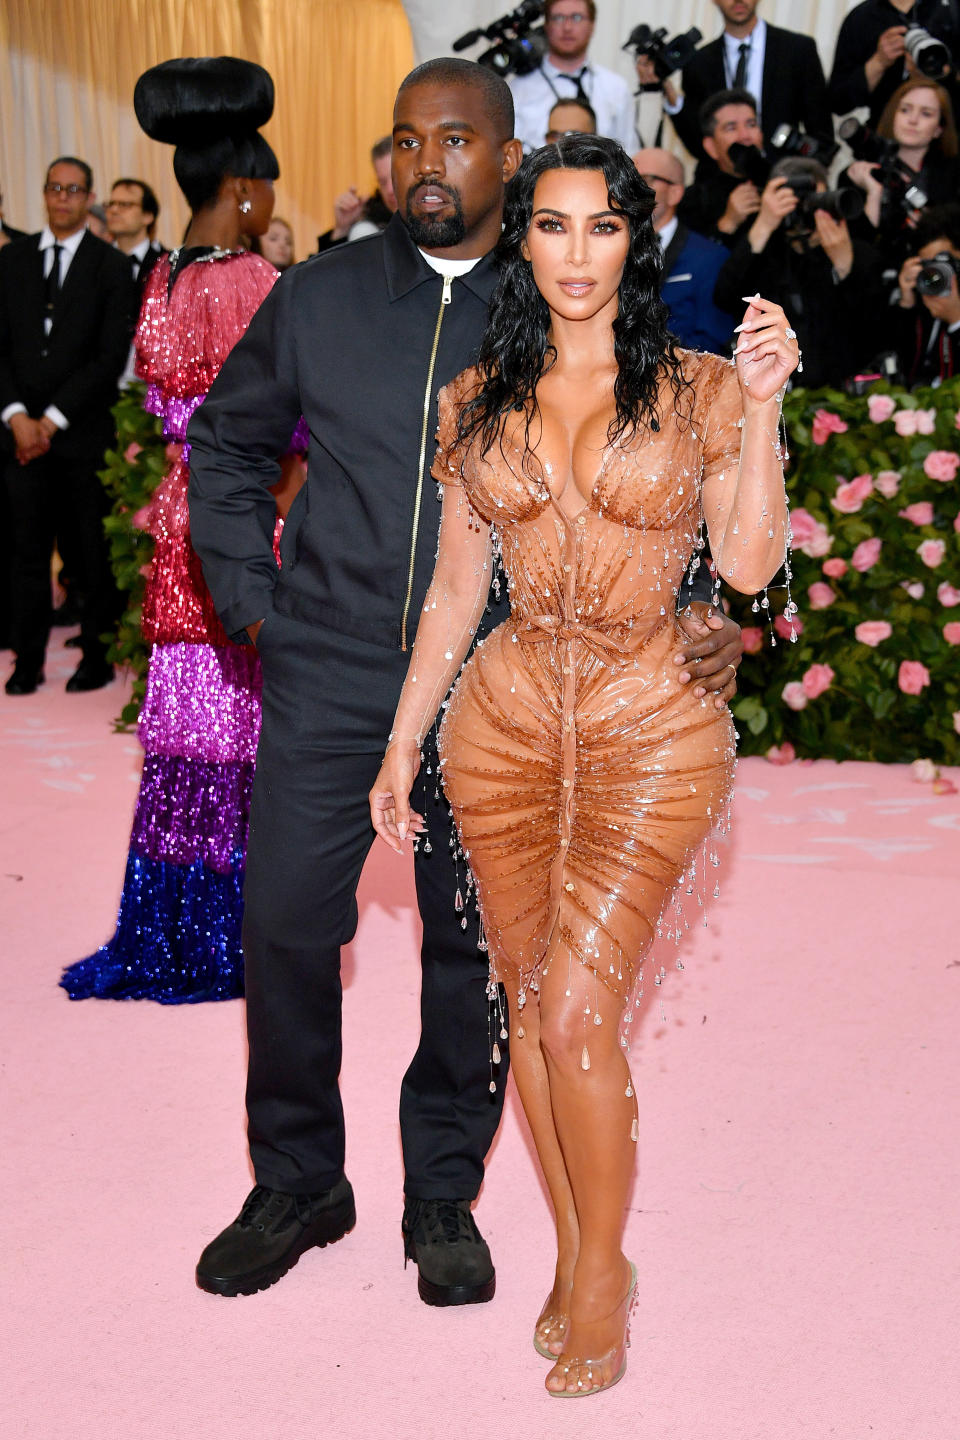 Kardashian, with West, at the 2019 Met Gala. (Photo: Dia Dipasupil via Getty Images)